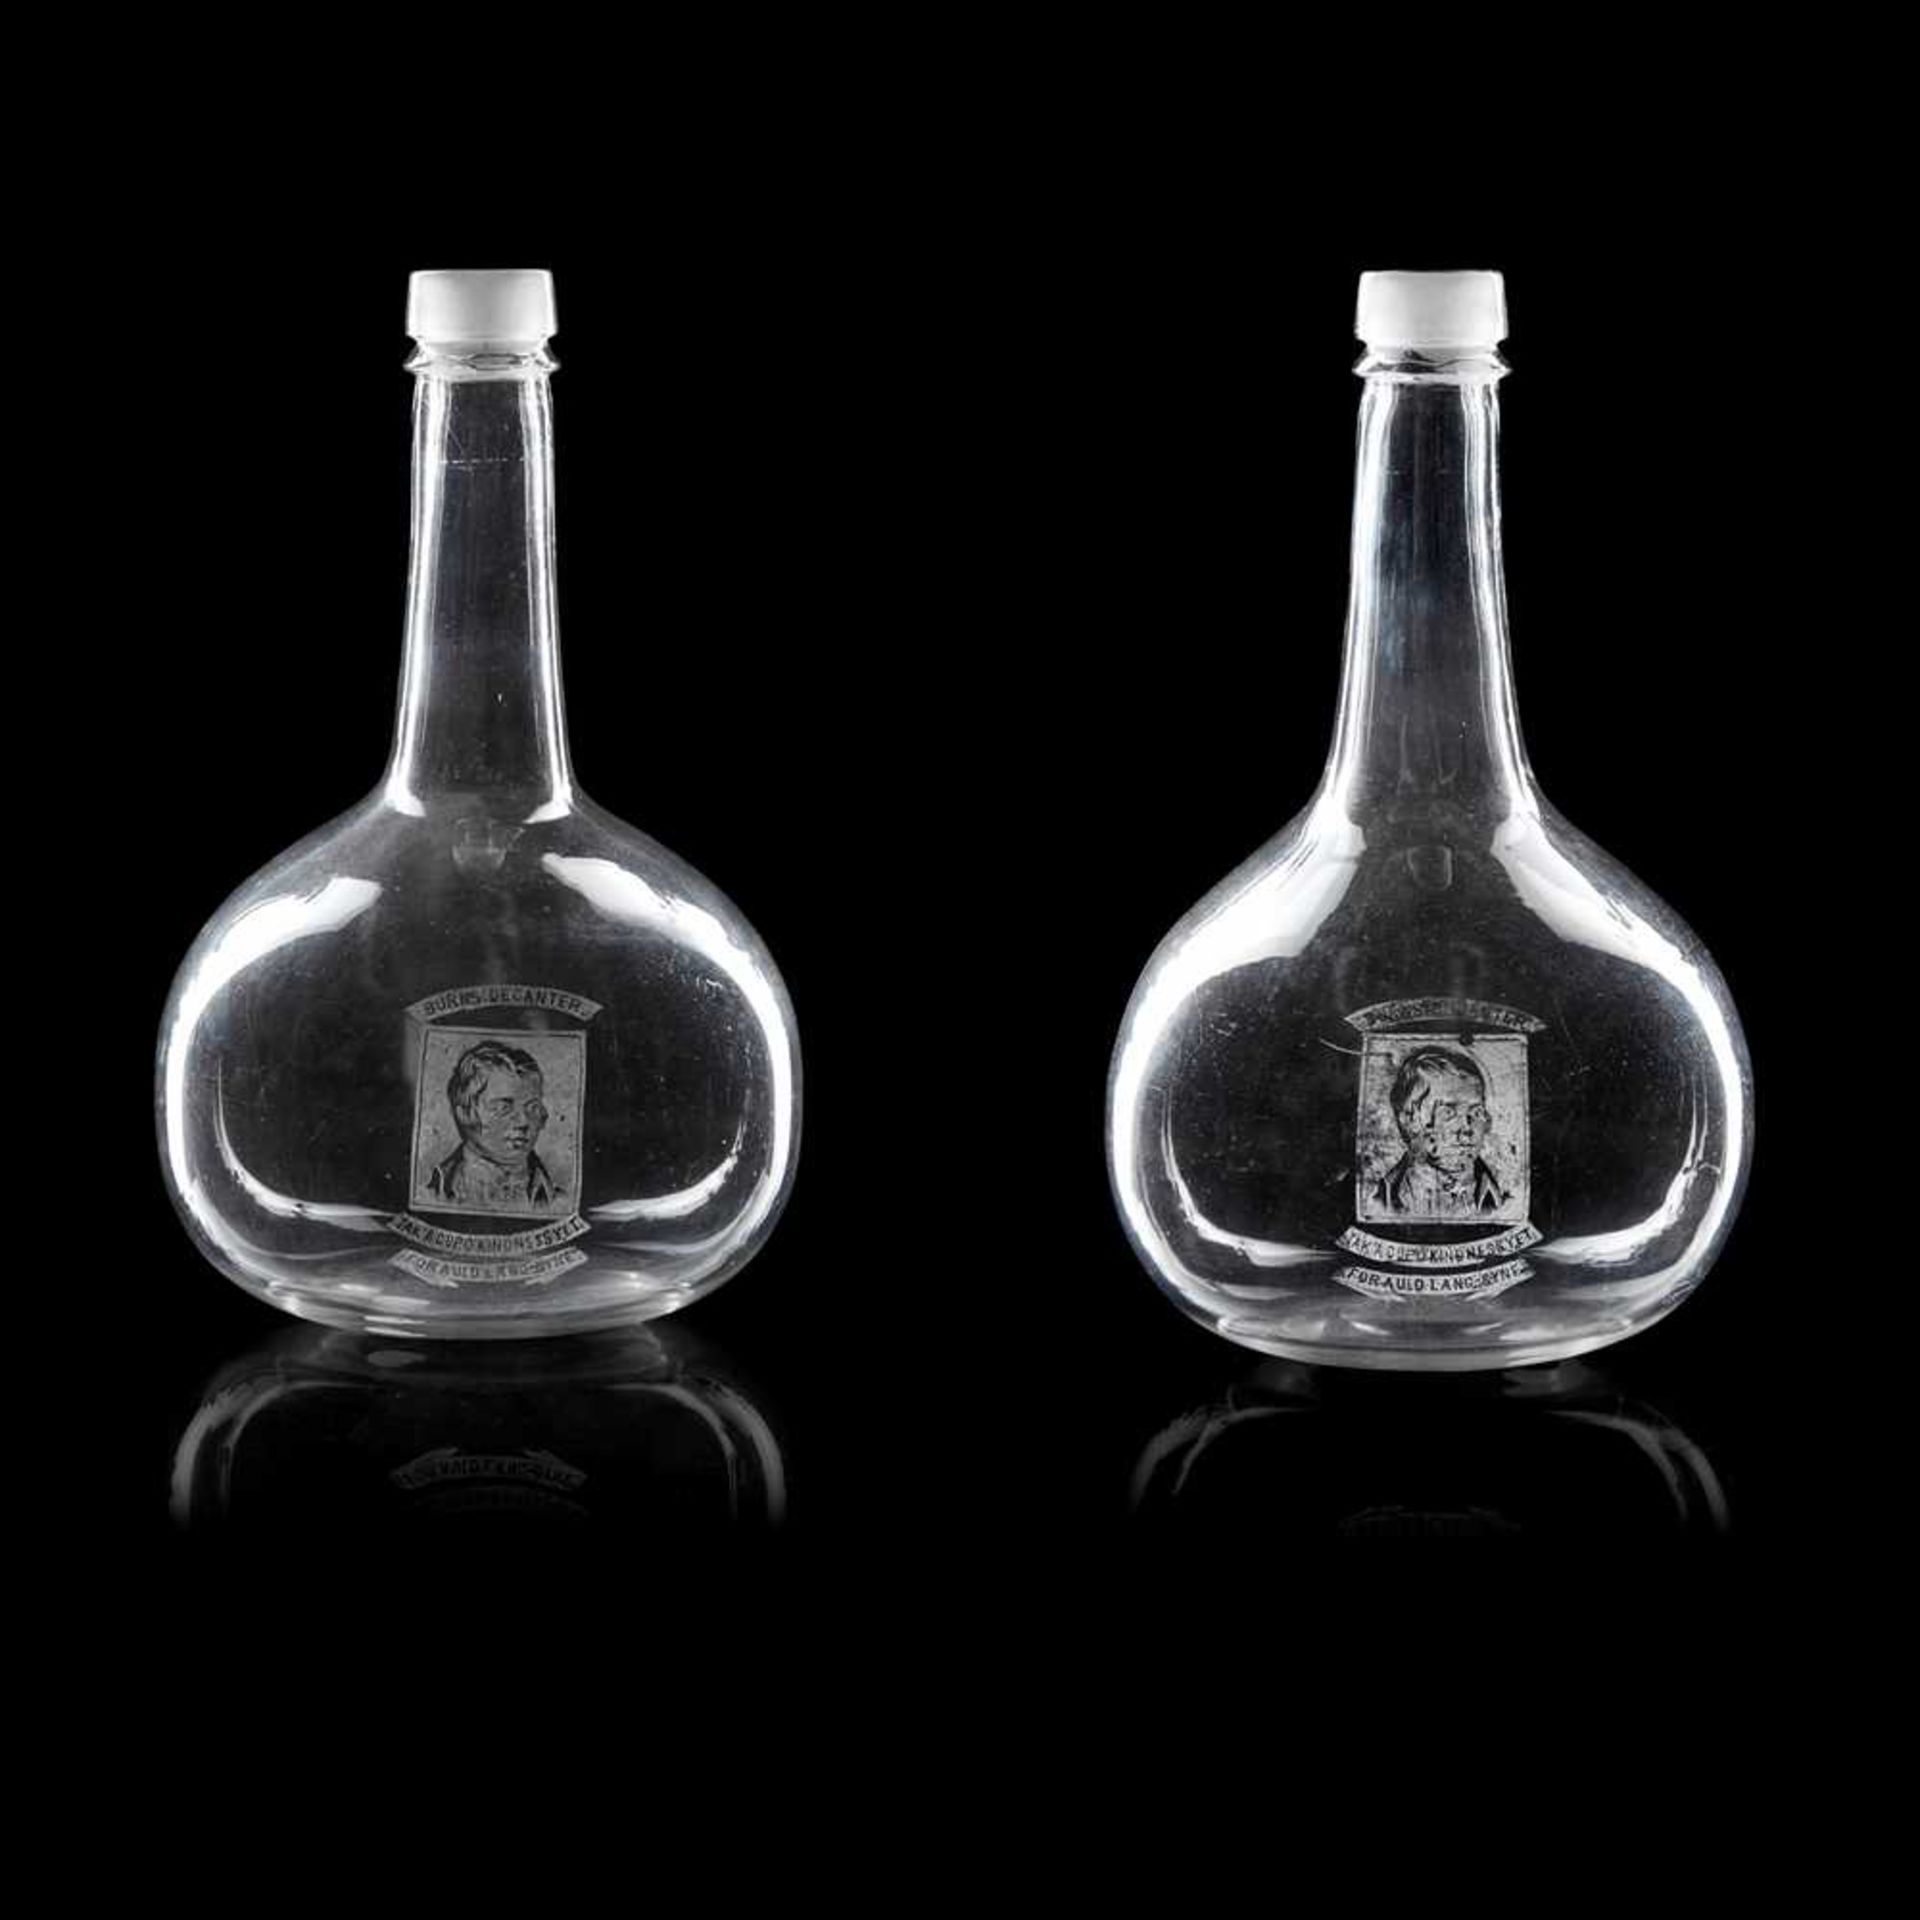 A PAIR OF VICTORIAN DECANTERS